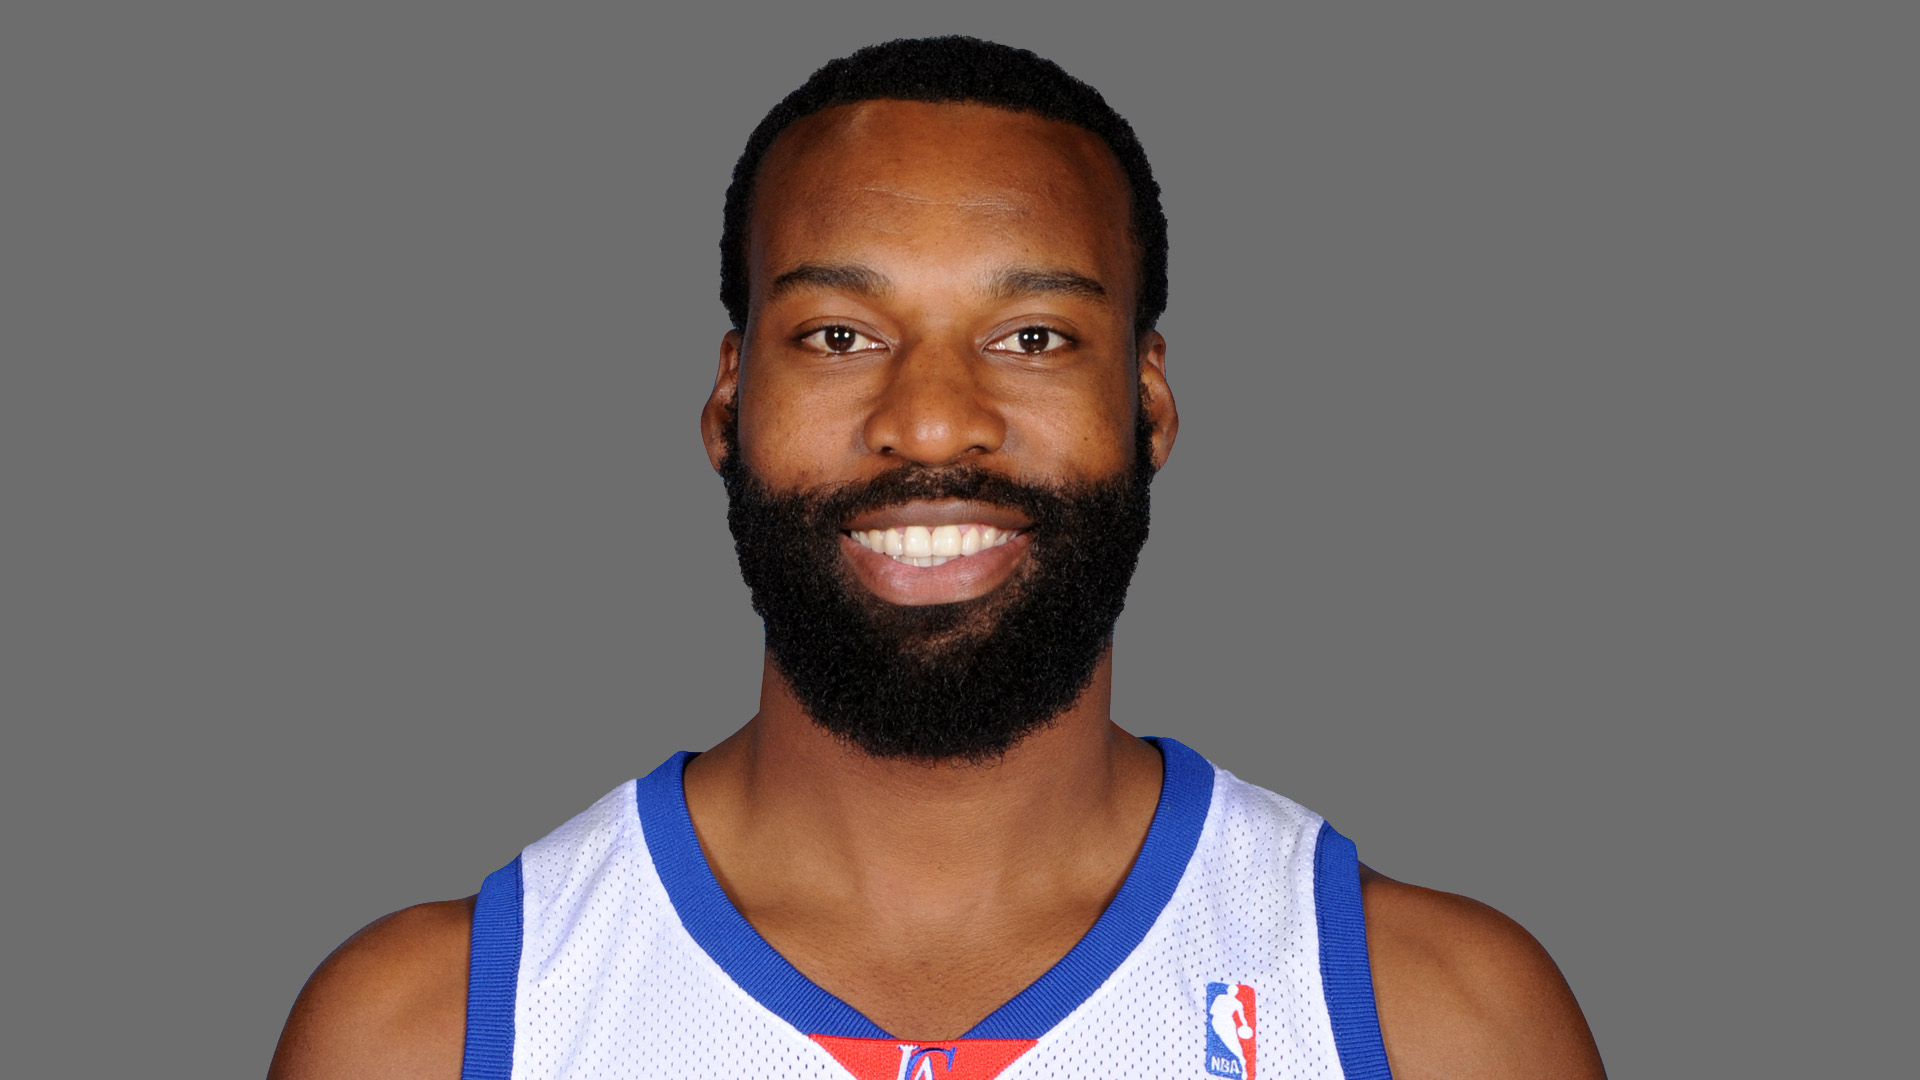 Baron Davis signs with Delaware 87ers, D-League affiliate of